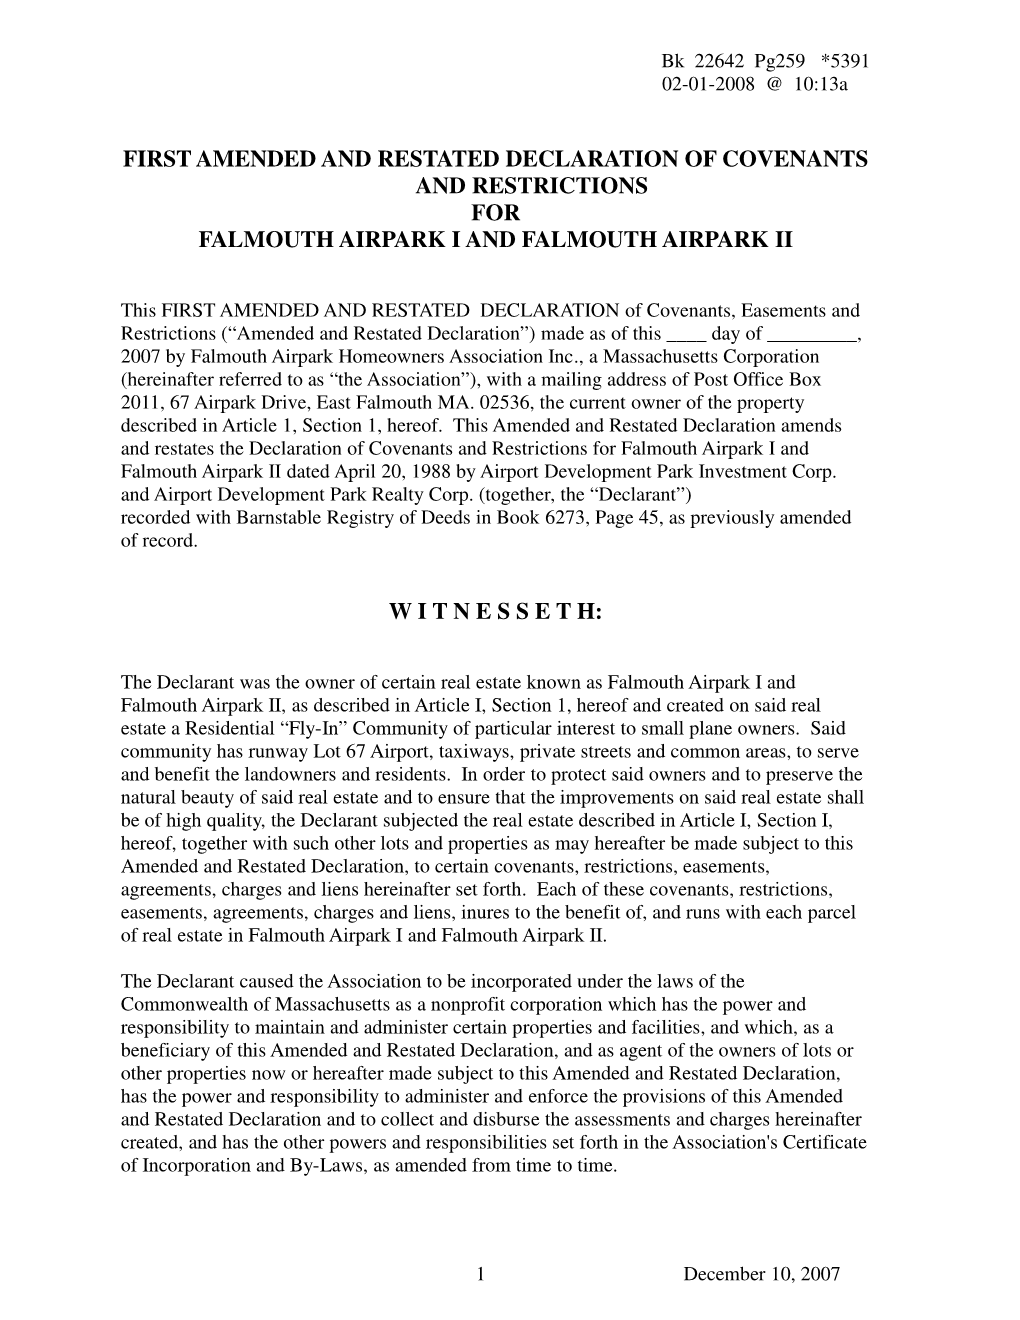 First Amended and Restated Declaration of Covenants and Restrictions for Falmouth Airpark I and Falmouth Airpark Ii W I T N